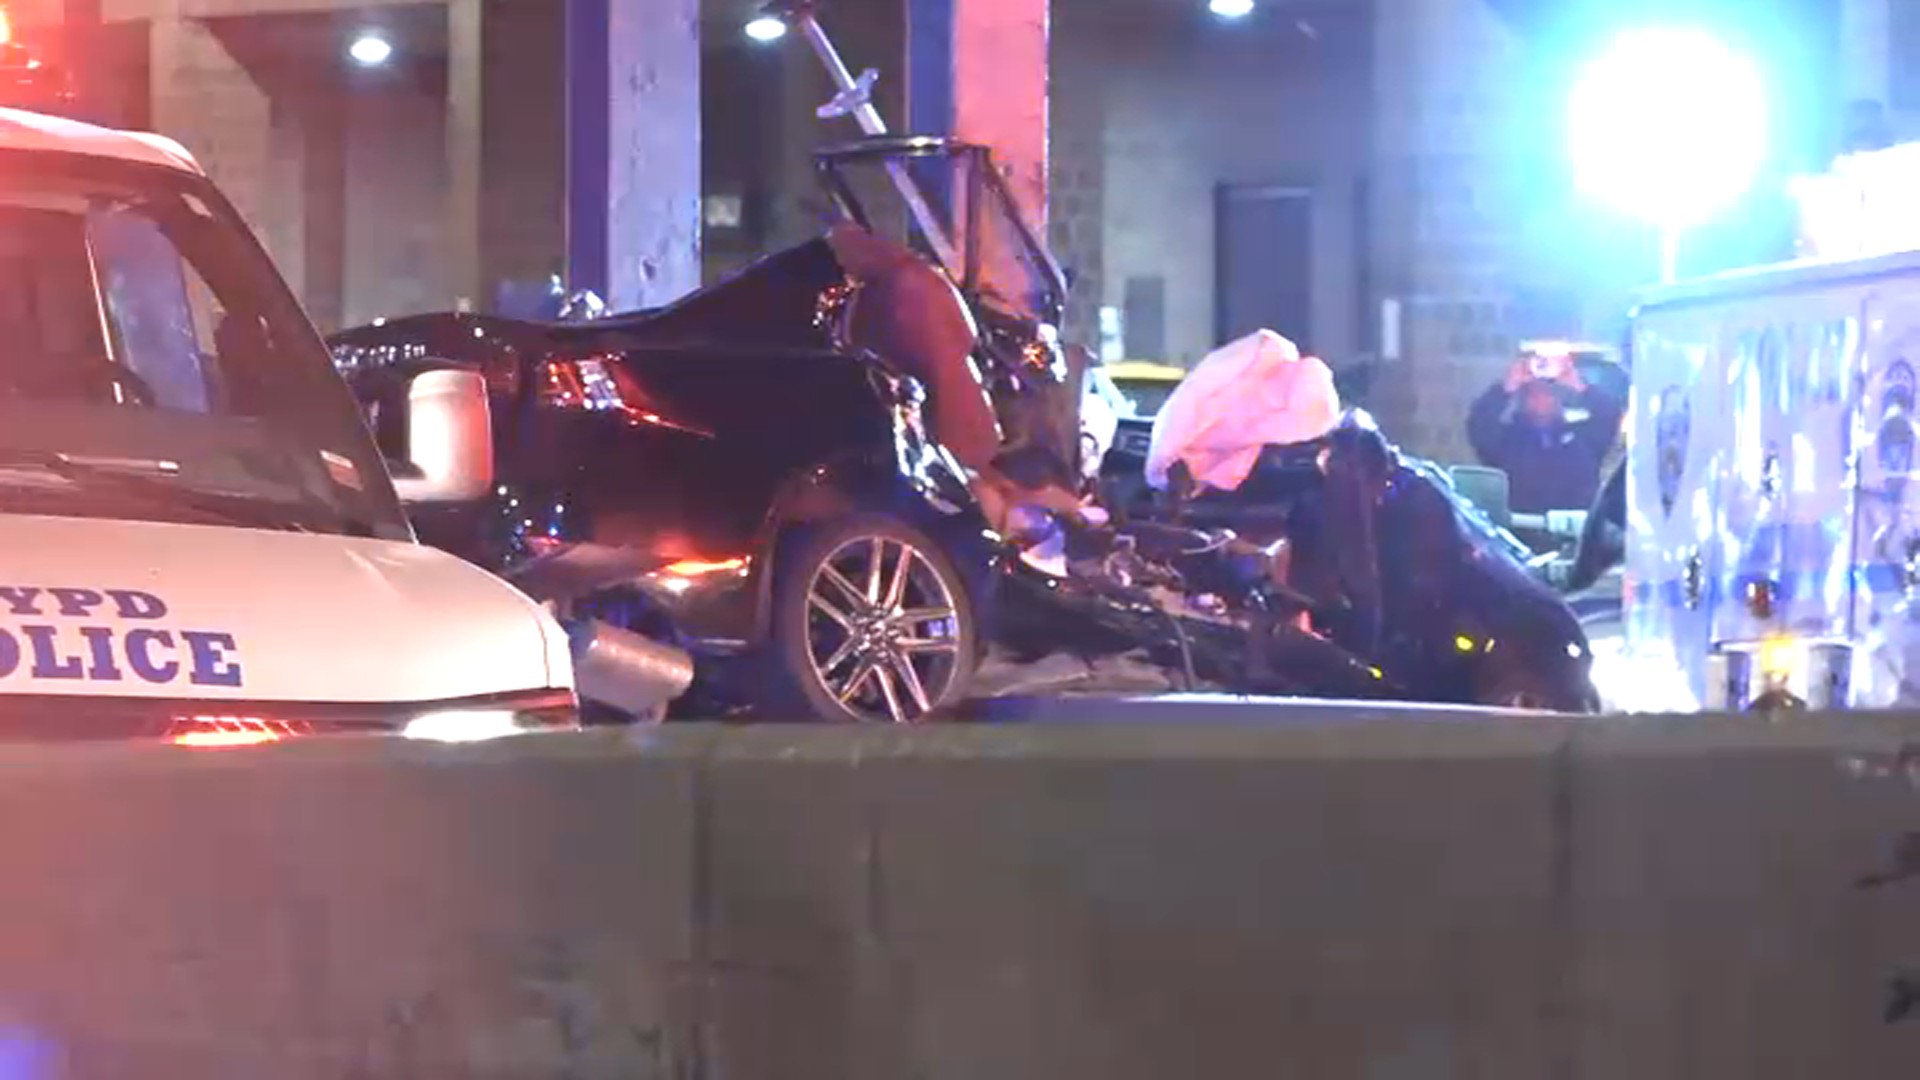 Police Officer Dead, Two Hurt in FDR Drive Crash: Sources